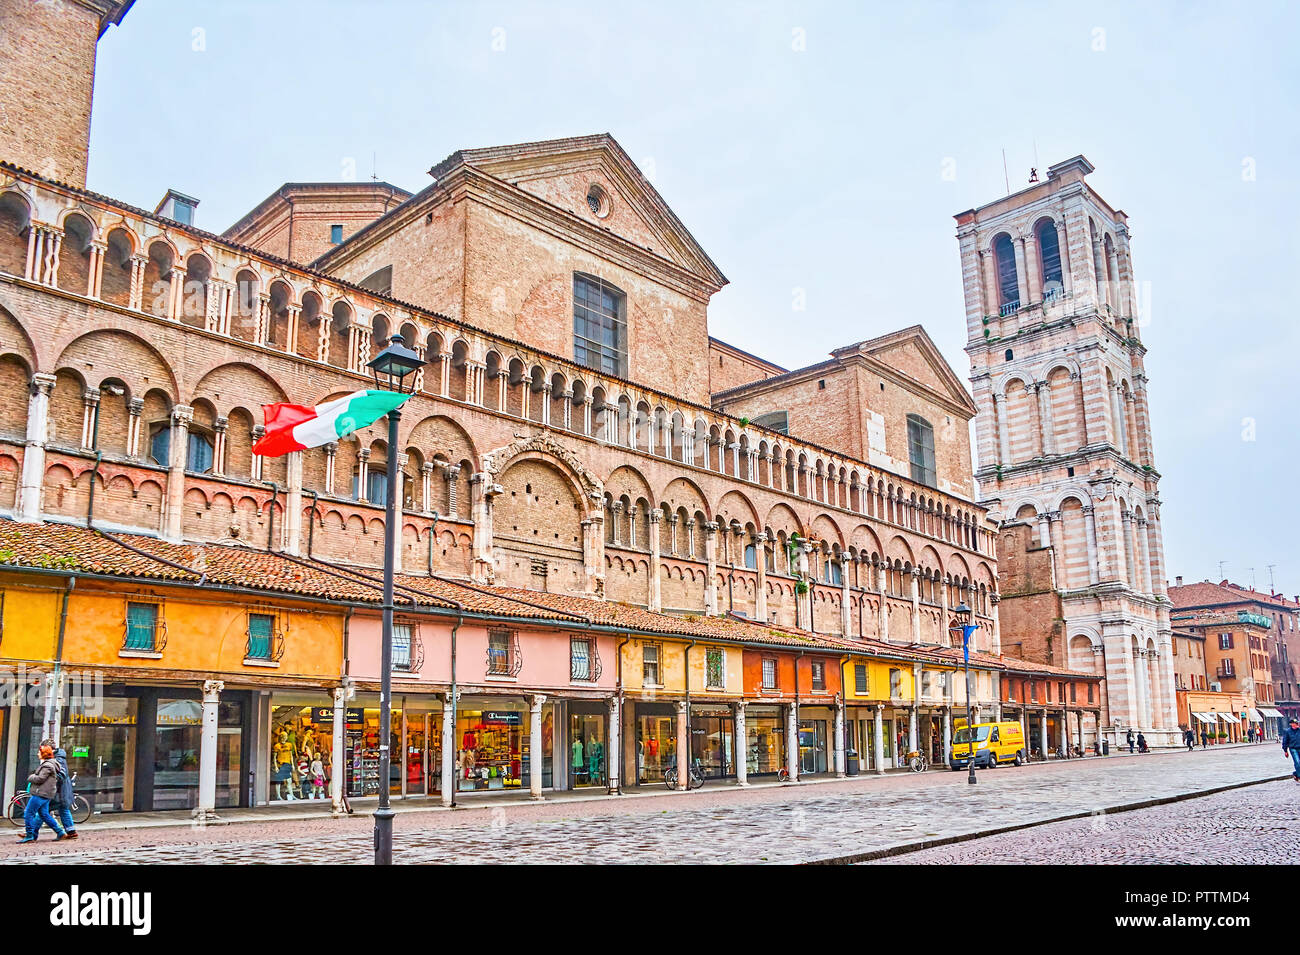 FERRARA, ITALY - APRIL 30, 2013: The south frontage of Ferrara Cathedral with stores on the ground floor and loggias above, on April 30 in Ferrara Stock Photo